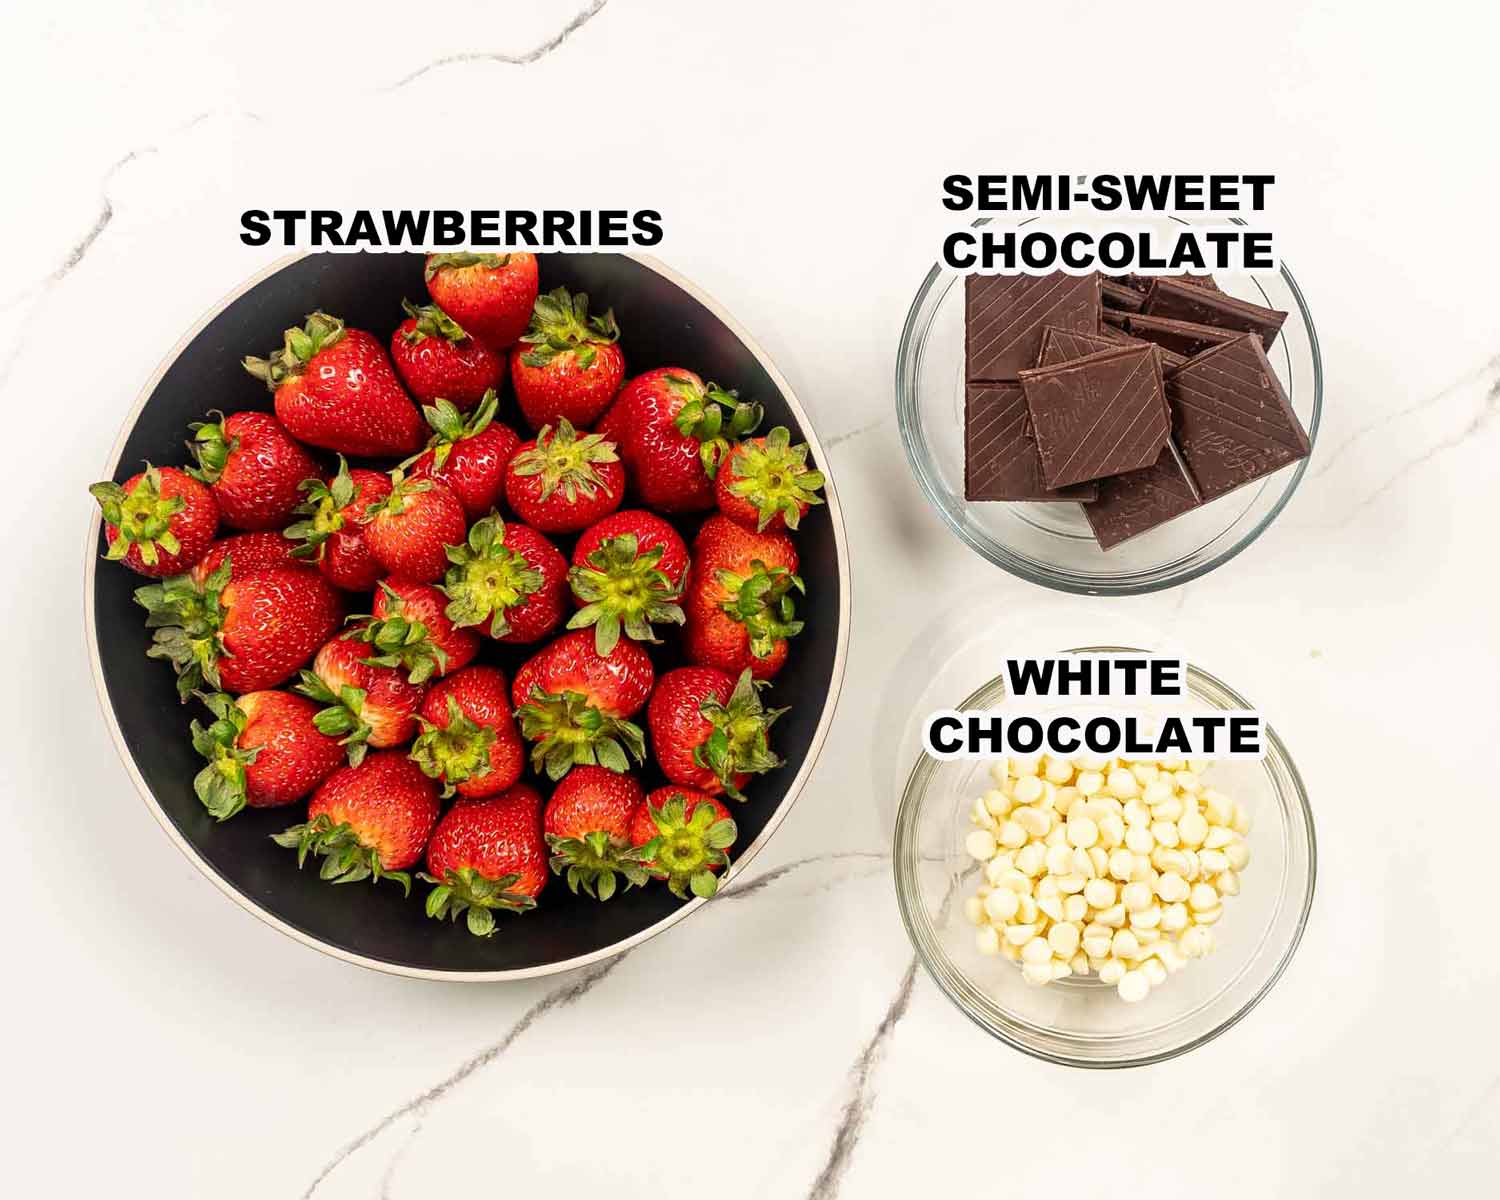 ingredients needed to make chocolate covered strawberries.